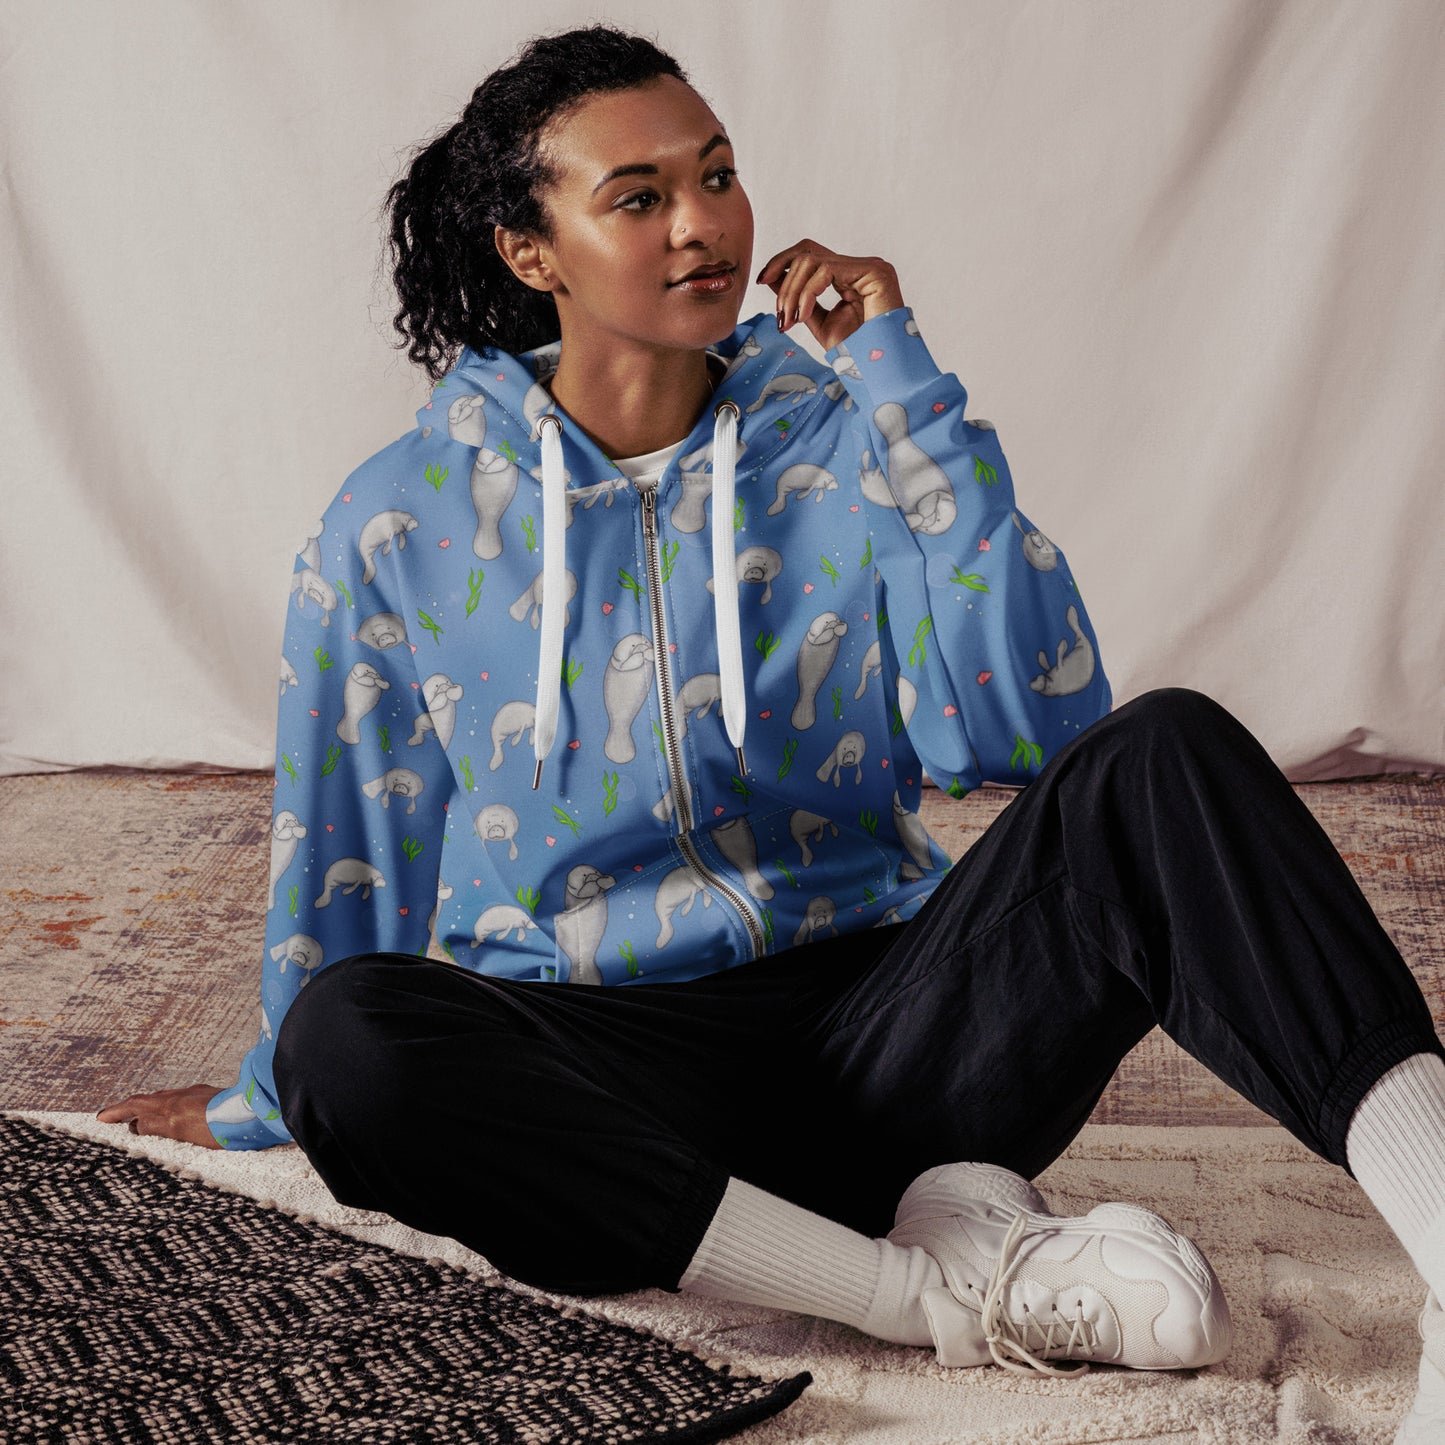 Unisex patterned manatee zip up hoodie. Made with recycled polyester. Soft cotton-feel outside fabric and fleece inside. Metal zipper, eyelets, and drawcord tips. Shown on female model sitting on carpet.